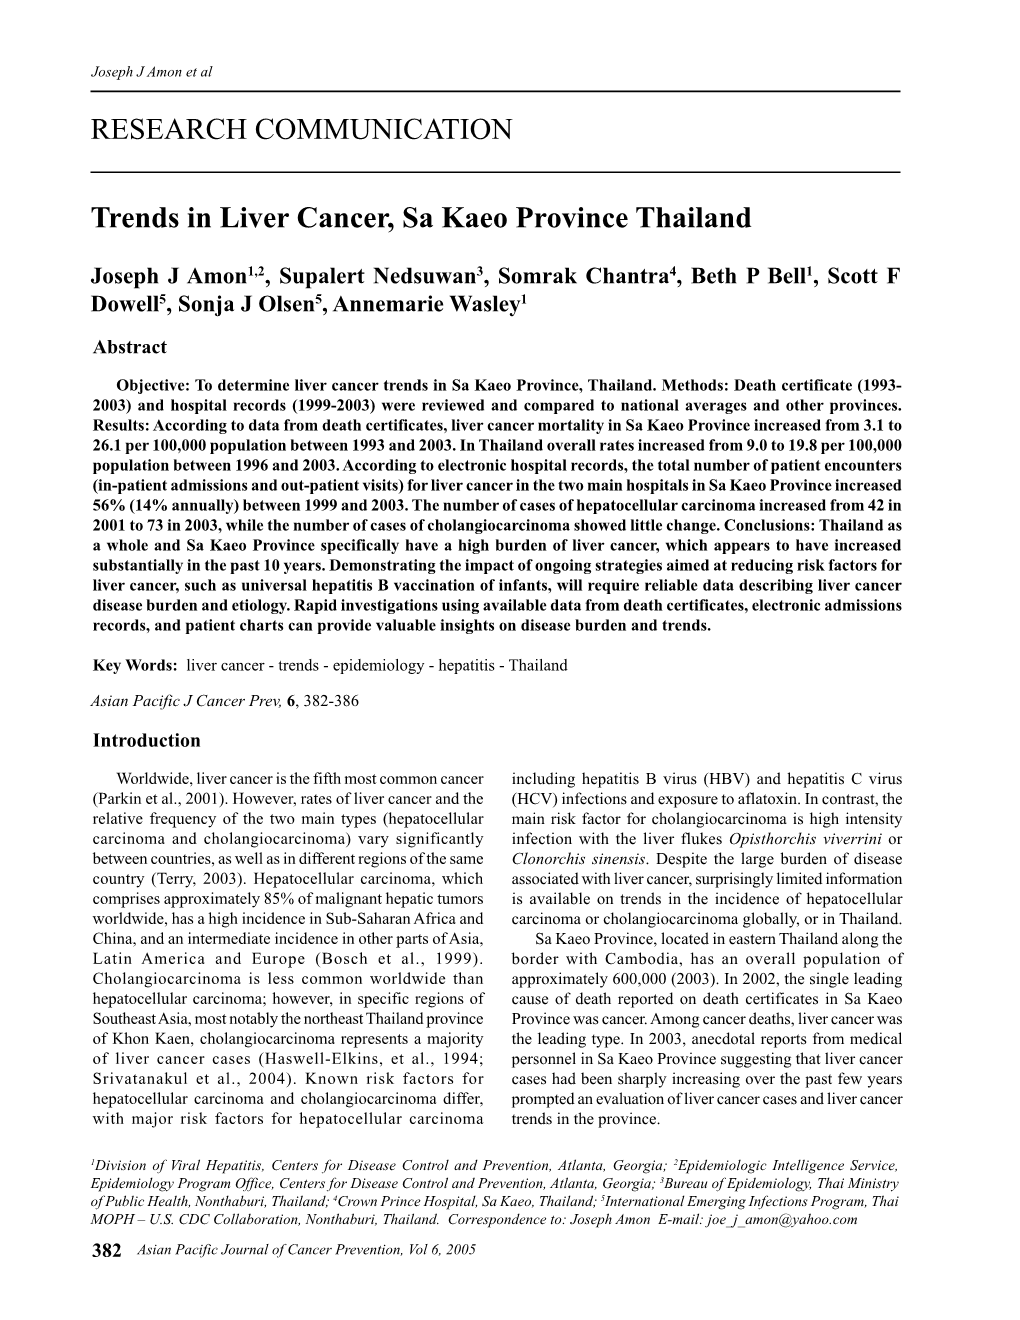 RESEARCH COMMUNICATION Trends in Liver Cancer, Sa Kaeo